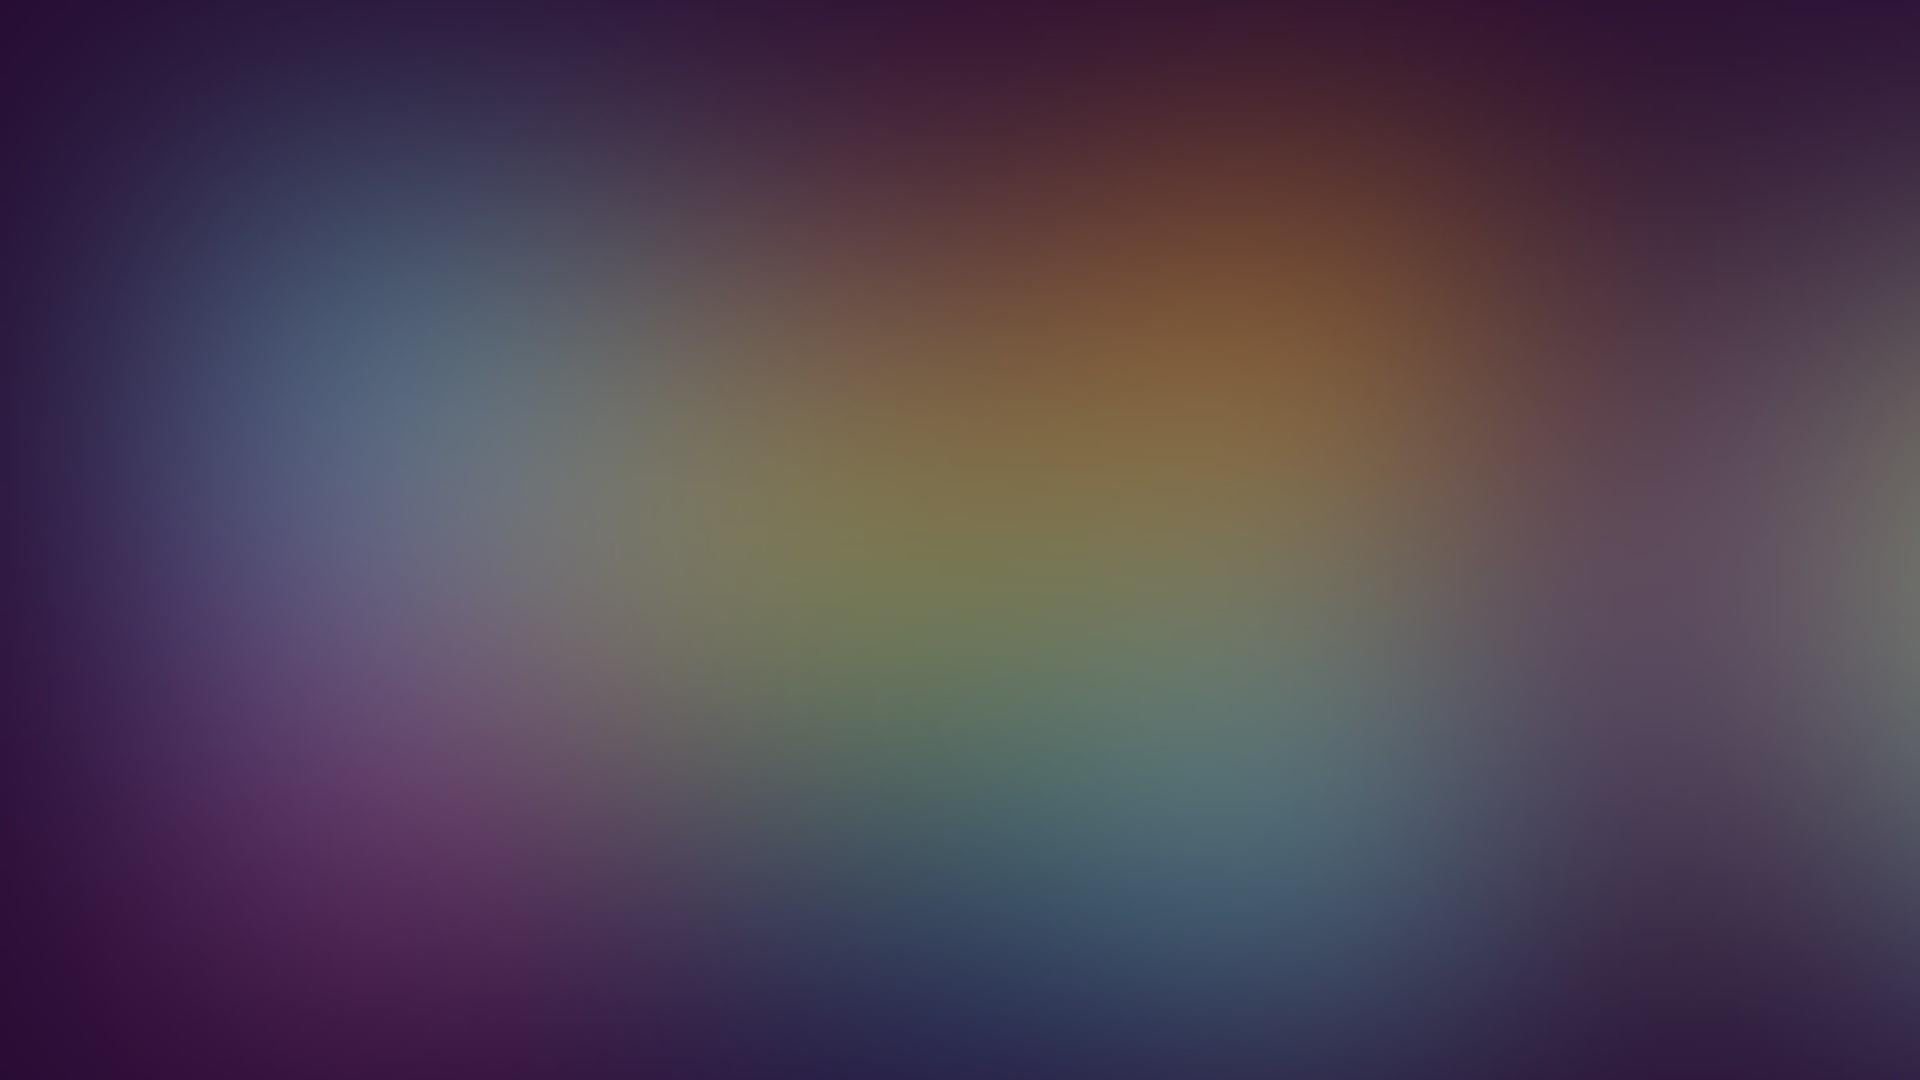 mulicolor, colors, obscure, blurry, gaussian blur, minimalist